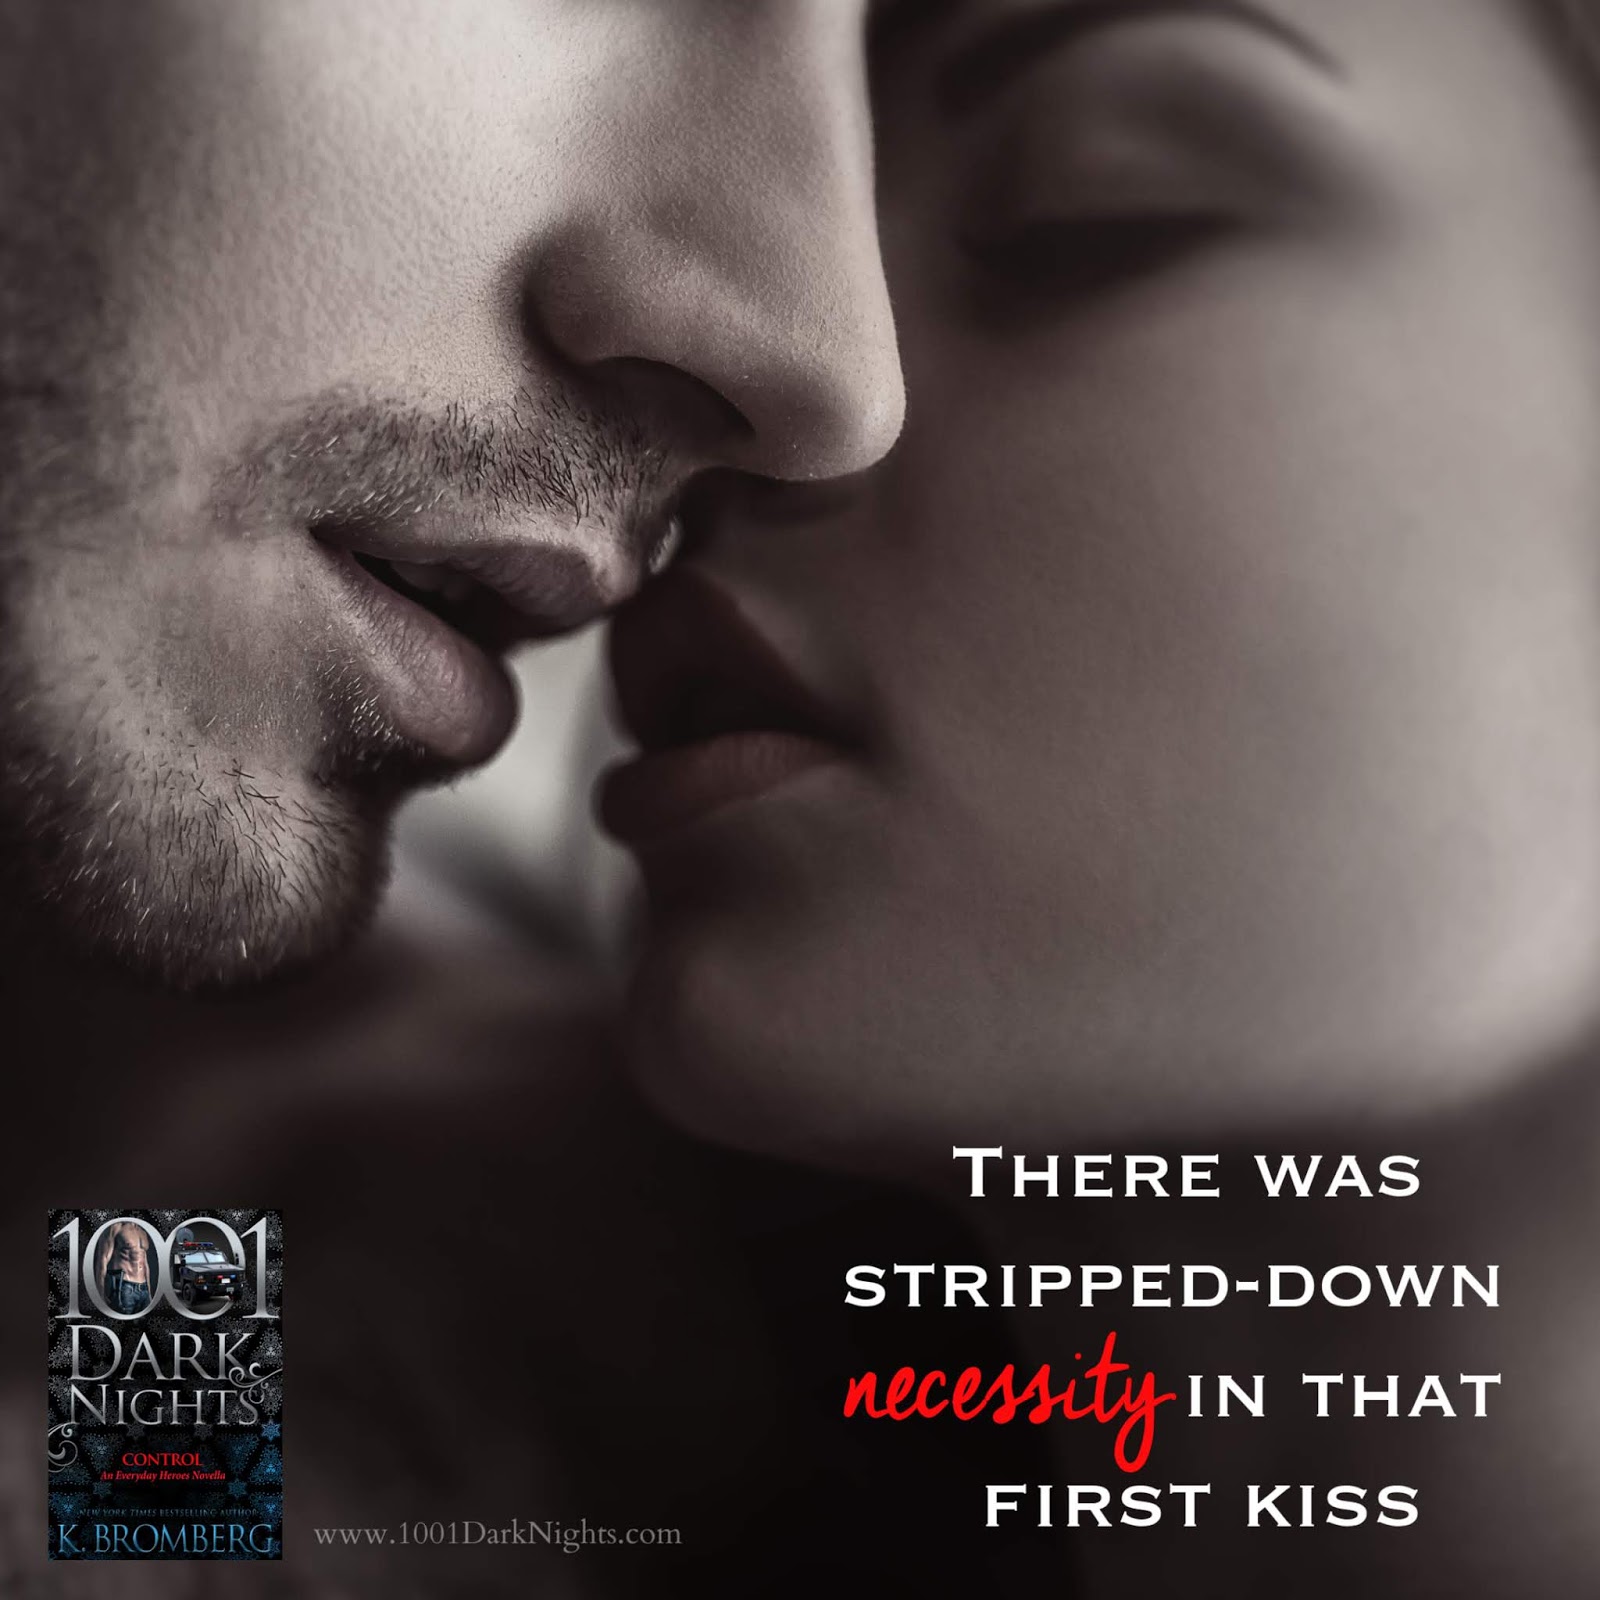 Release Blitz: Control by K. Bromberg.